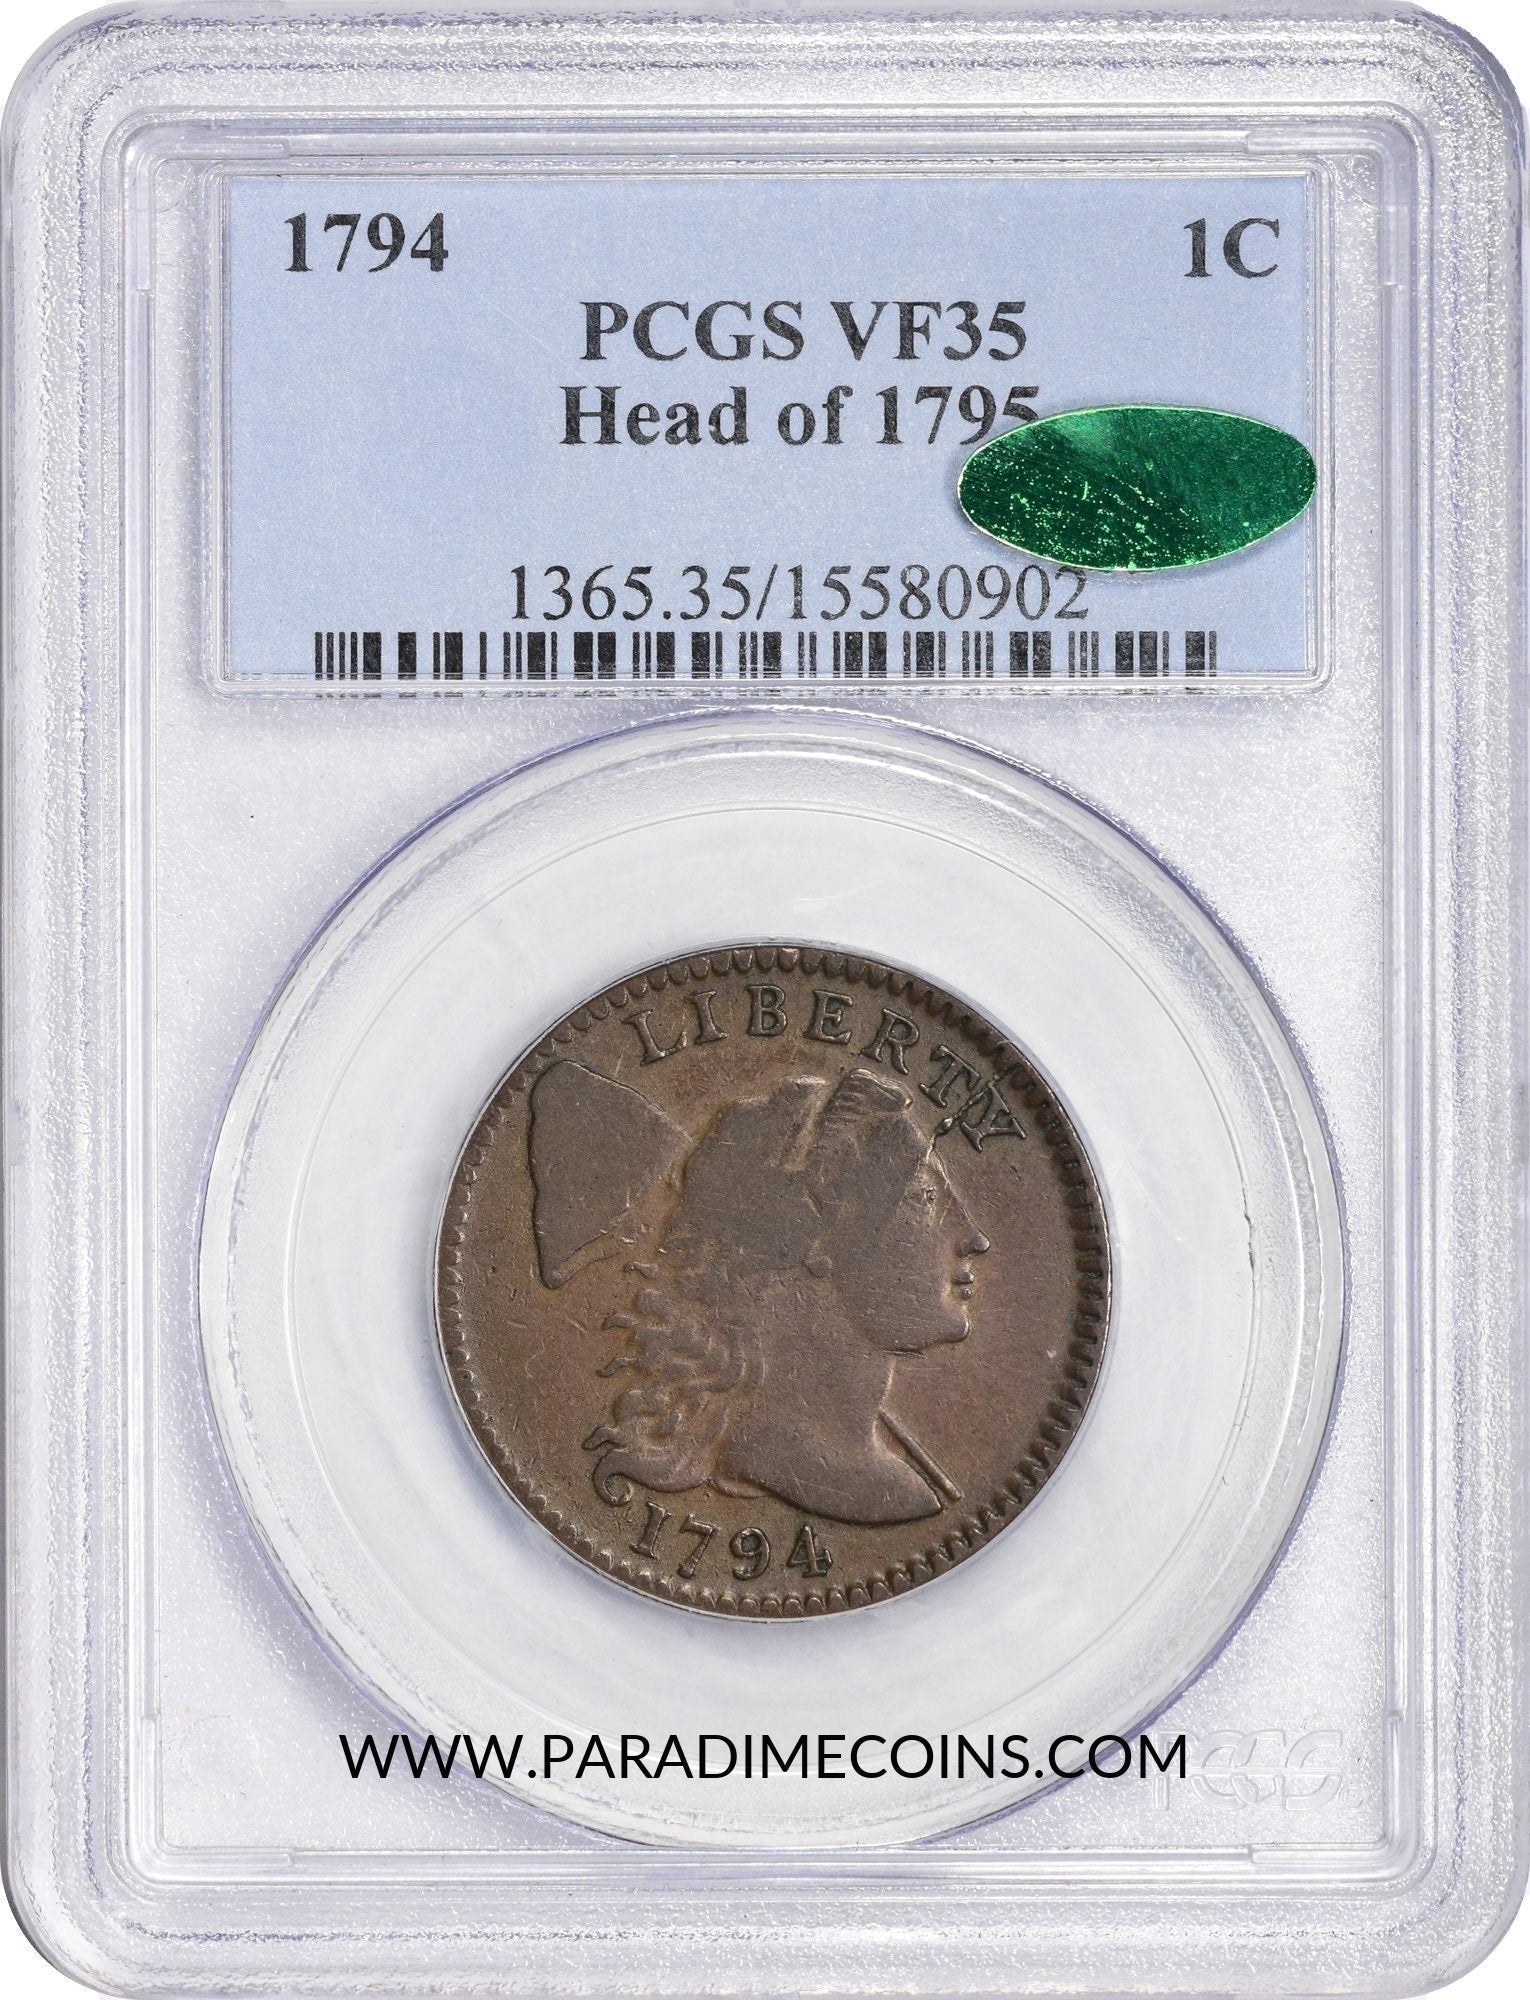 1794 1C S-70 HEAD OF 1795 VF35 PCGS CAC - Paradime Coins | PCGS NGC CACG CAC Rare US Numismatic Coins For Sale